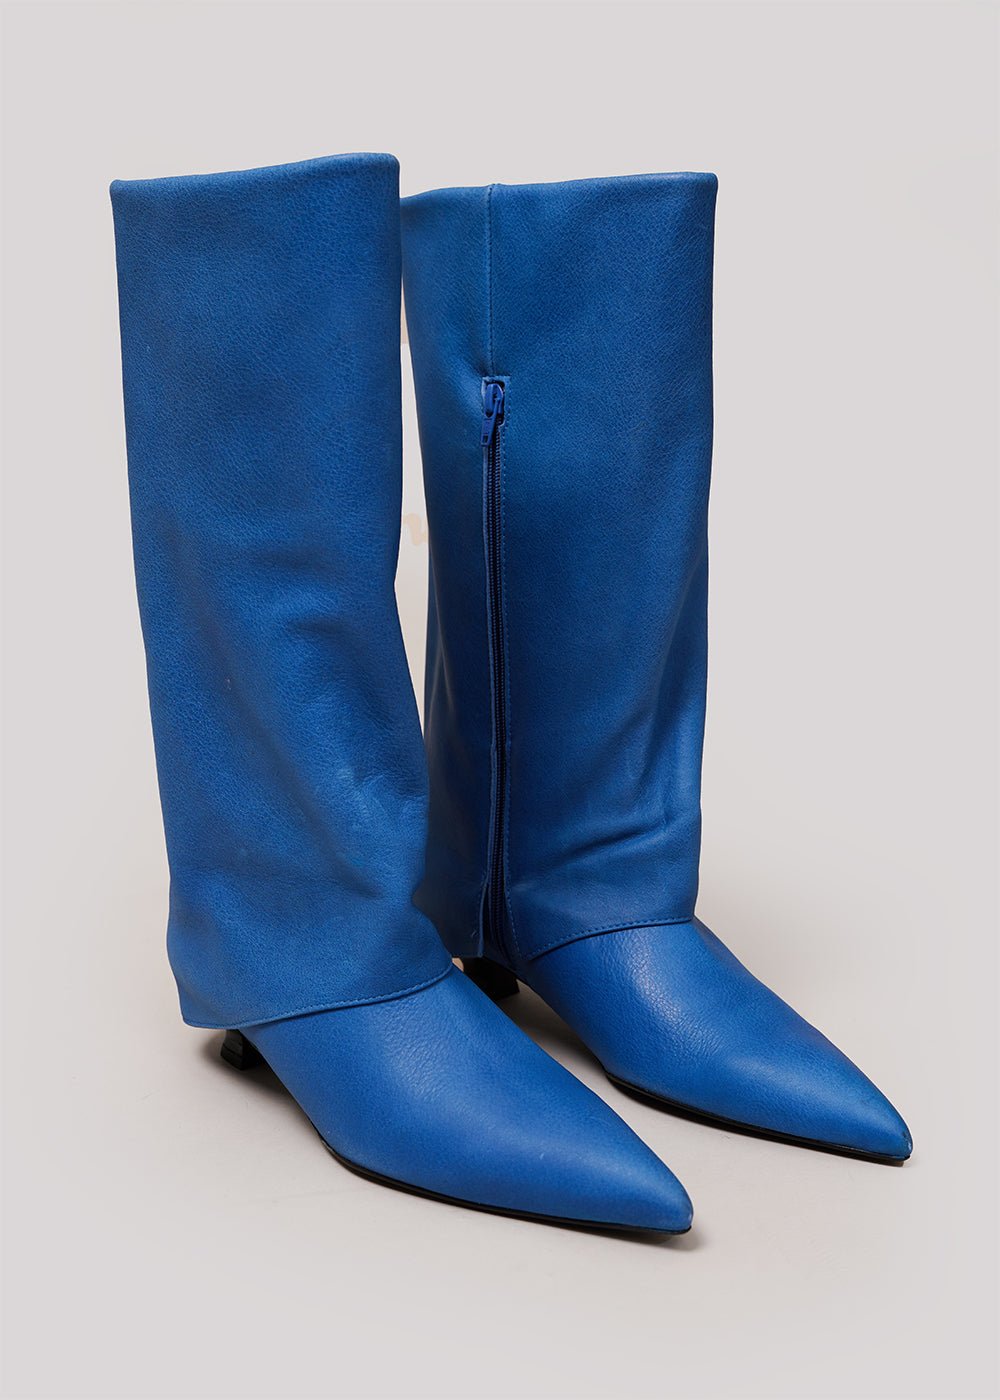 Paloma Wool Blue Fortuna Boots - New Classics Studios Sustainable Ethical Fashion Canada